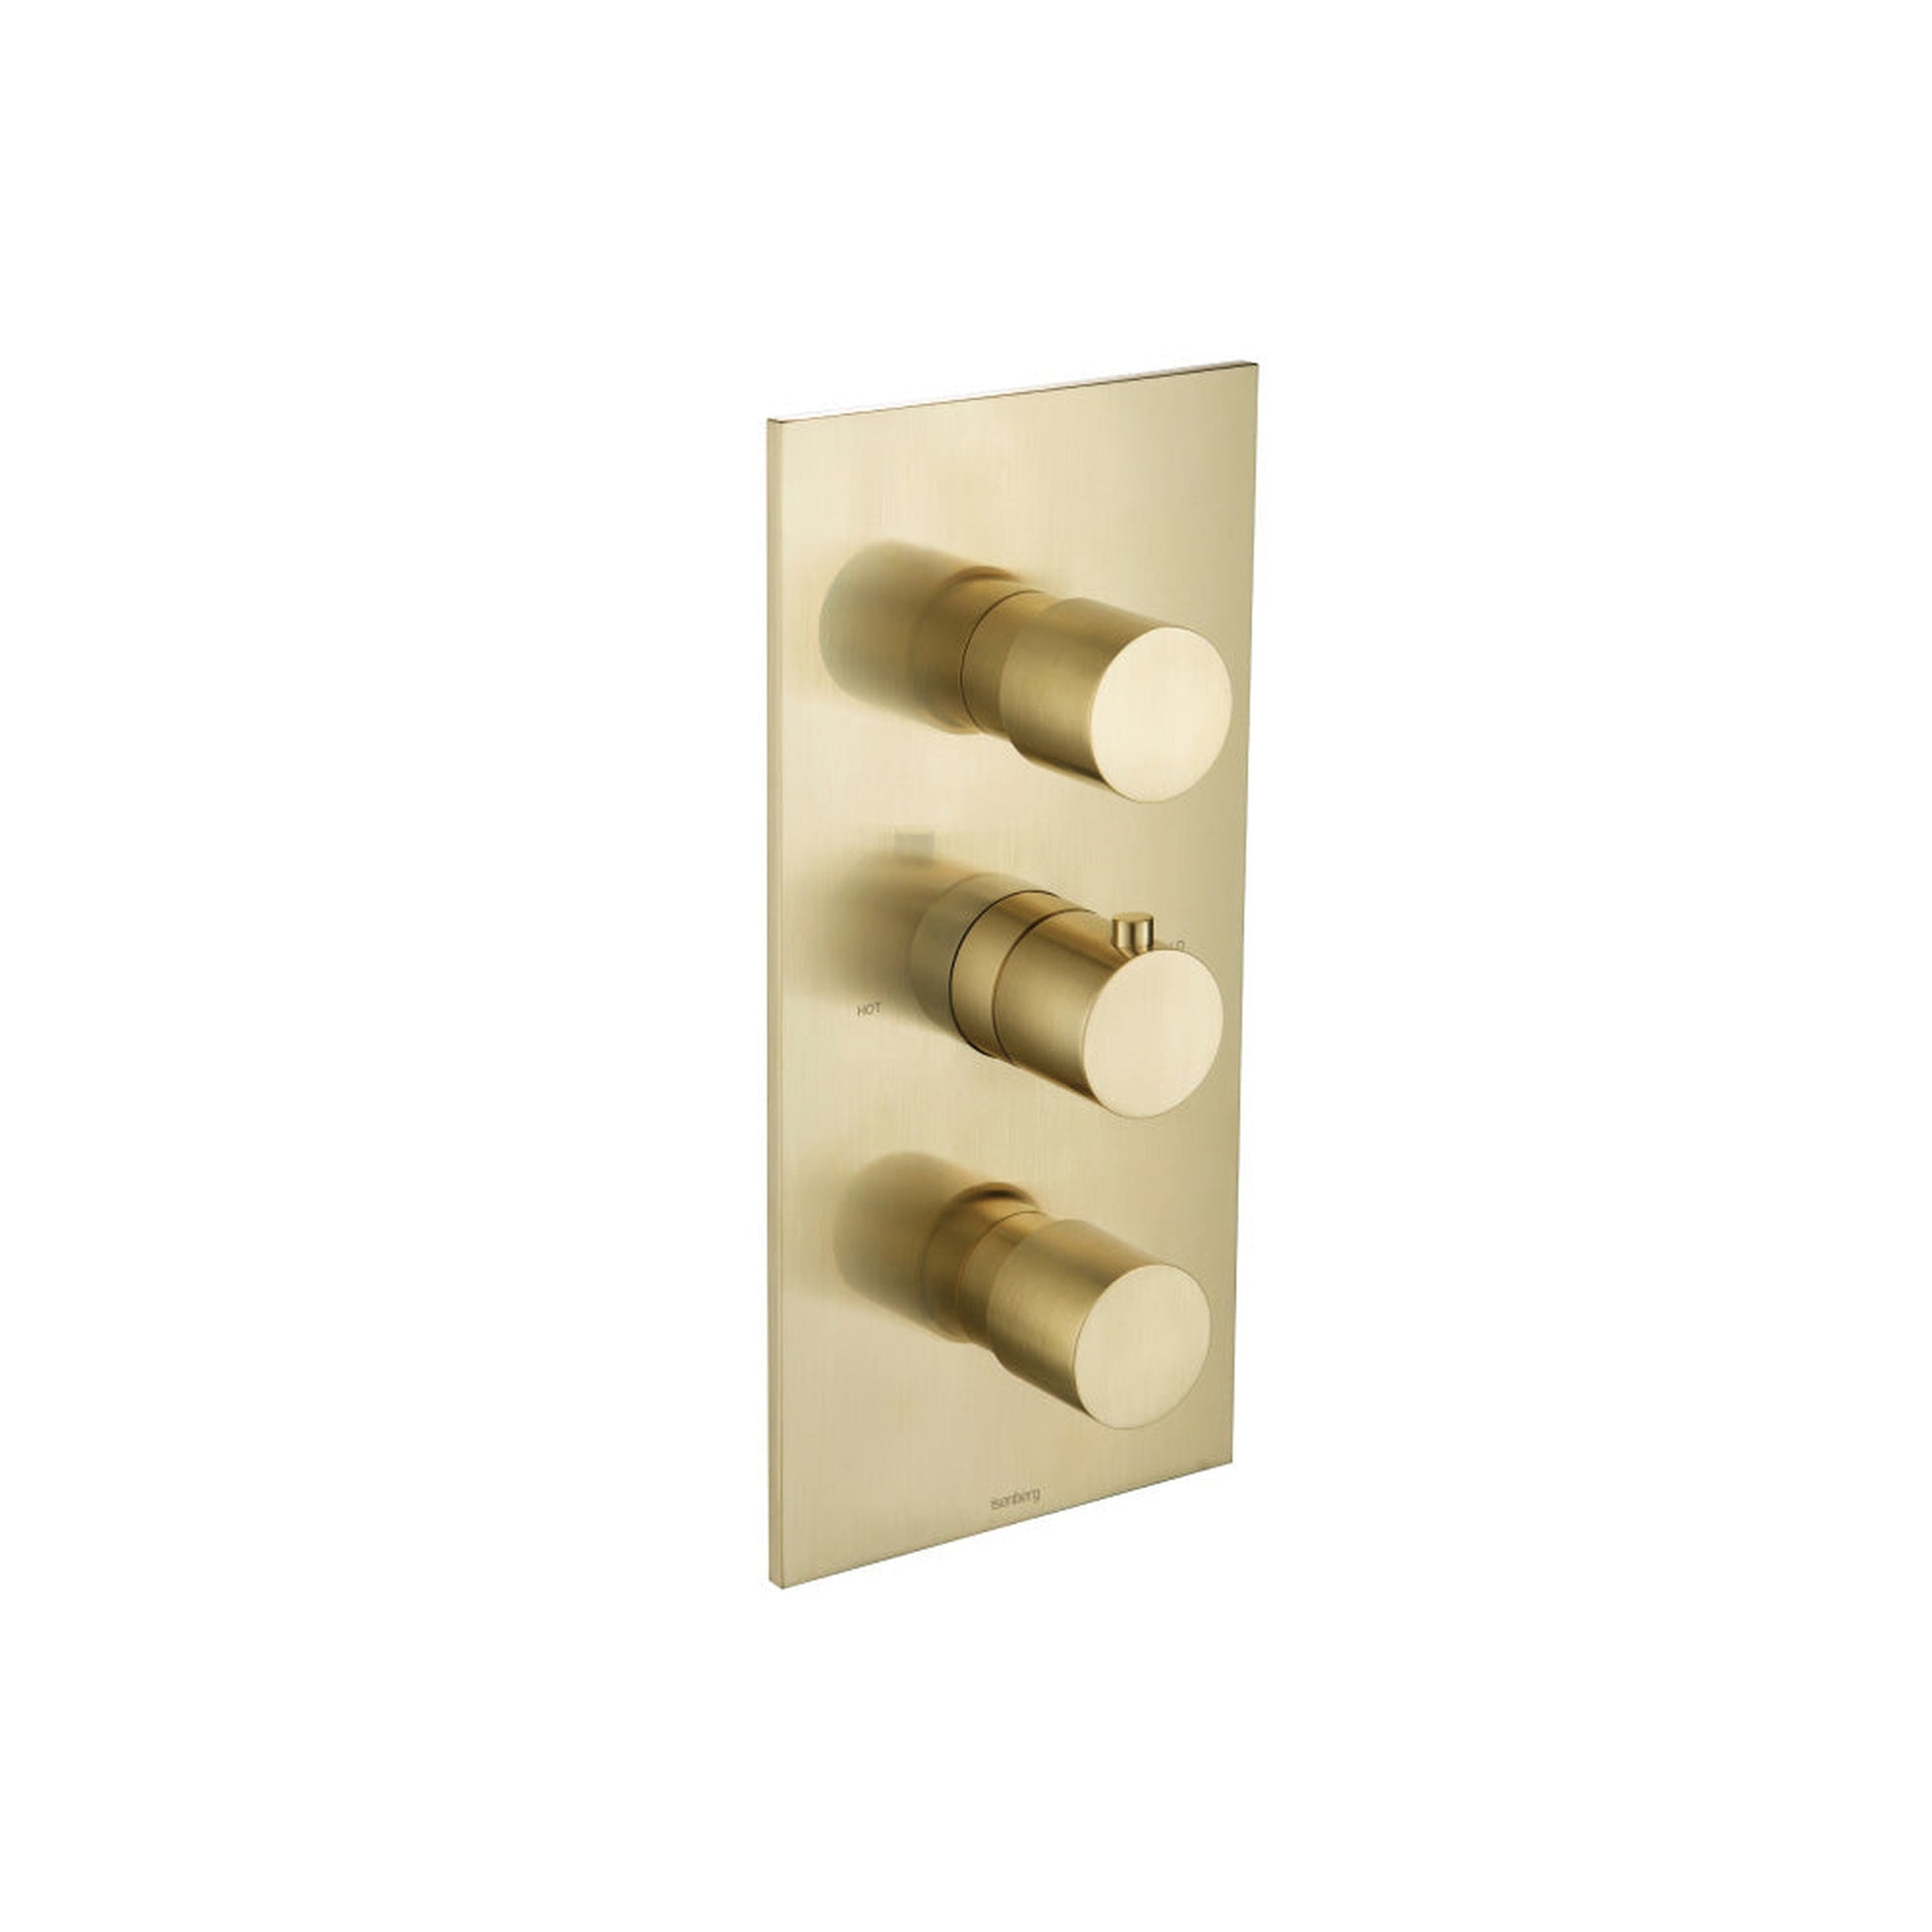 Isenberg Serie 100 3/4" Four Output Thermostatic Valve and Trim in Satin Brass